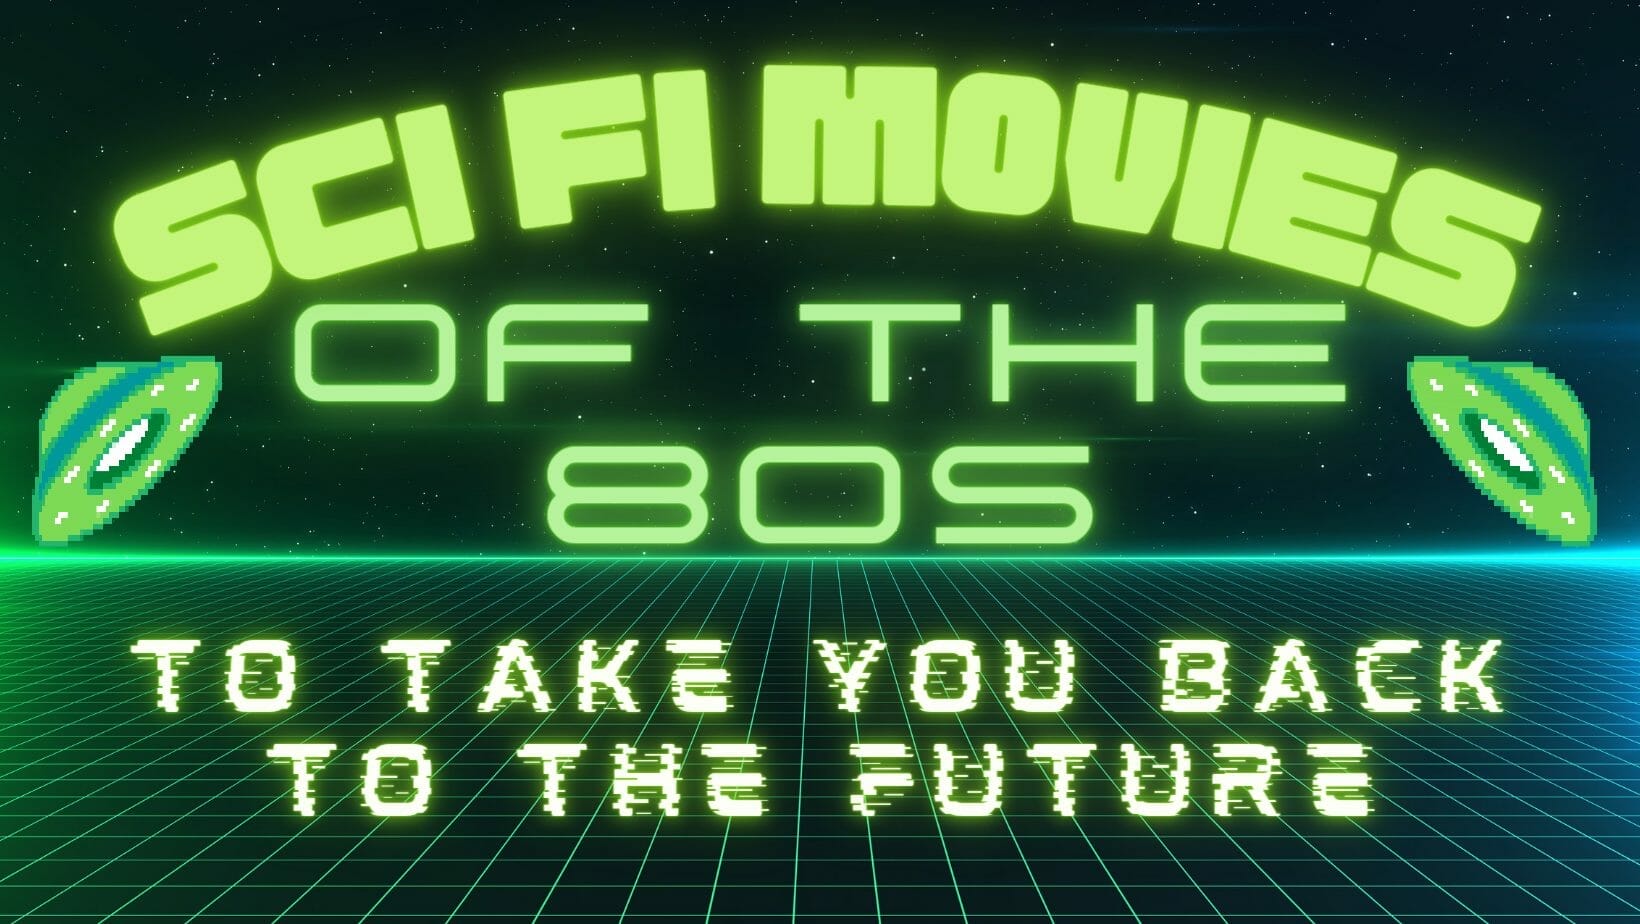 80s Sci Fi Movies To Take You Back To The Future